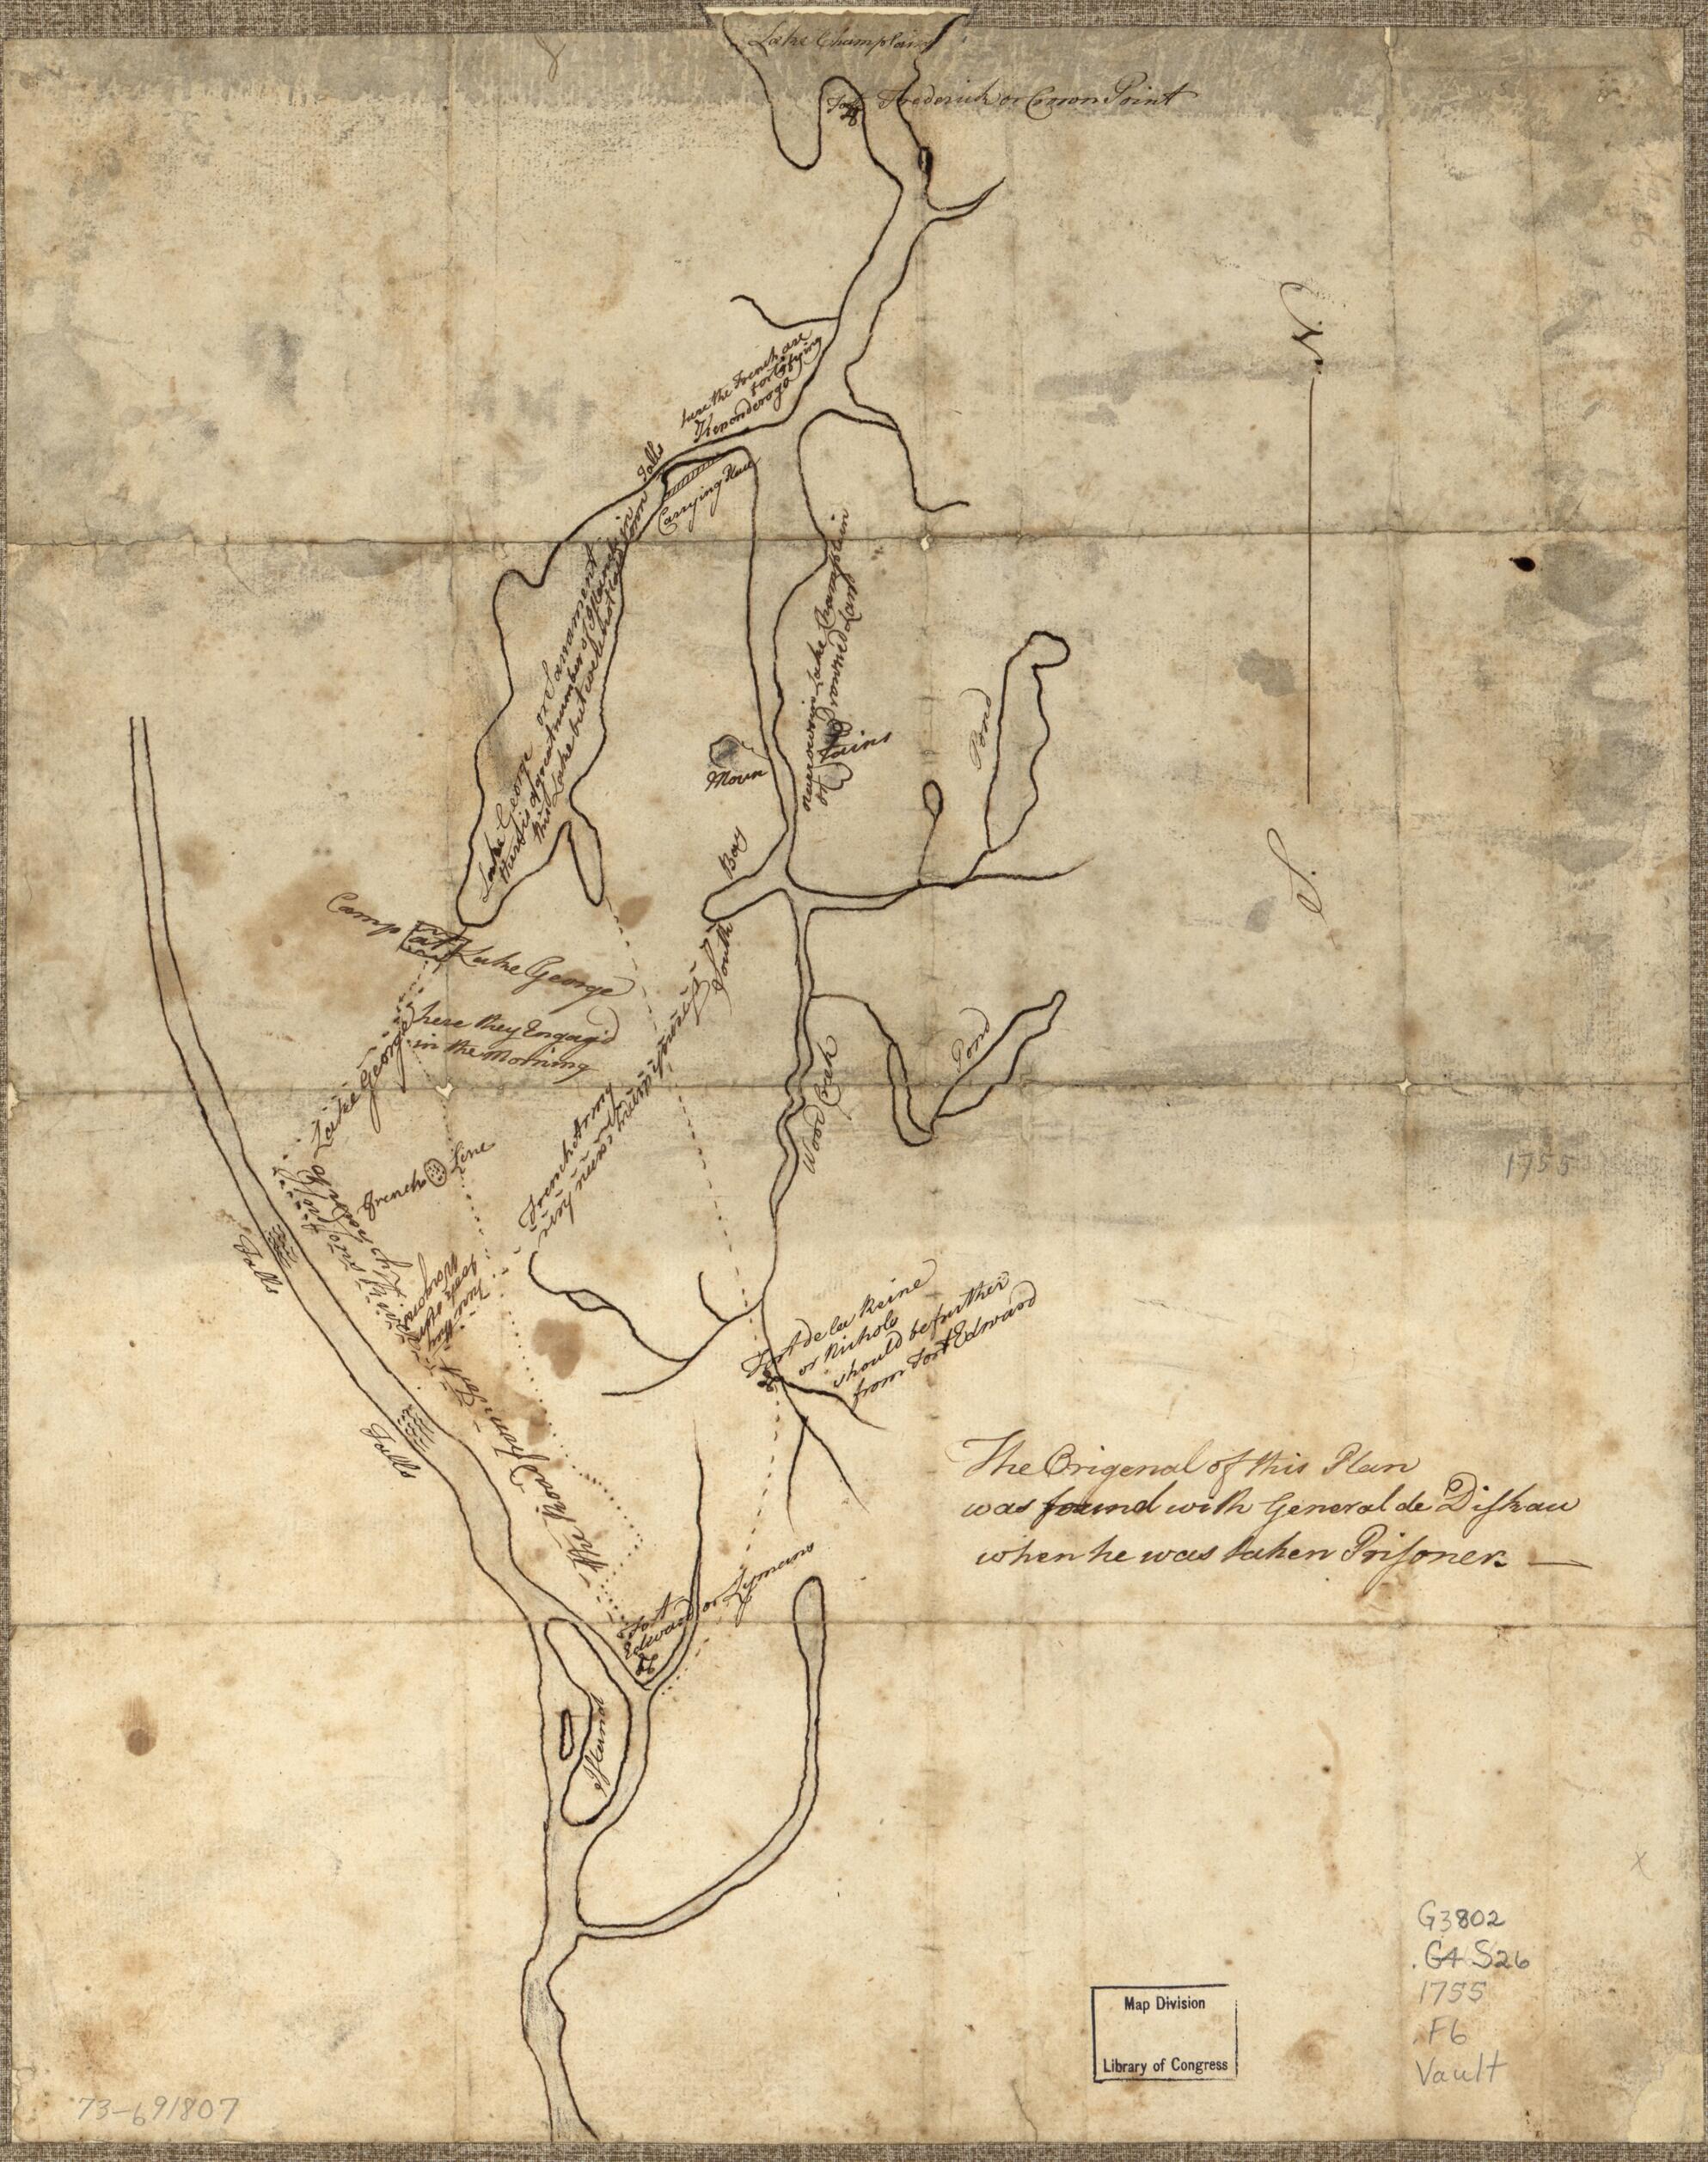 This old map of Fort Edward to Crown Point from 1755 was created by Jean Hermant Dieskau in 1755